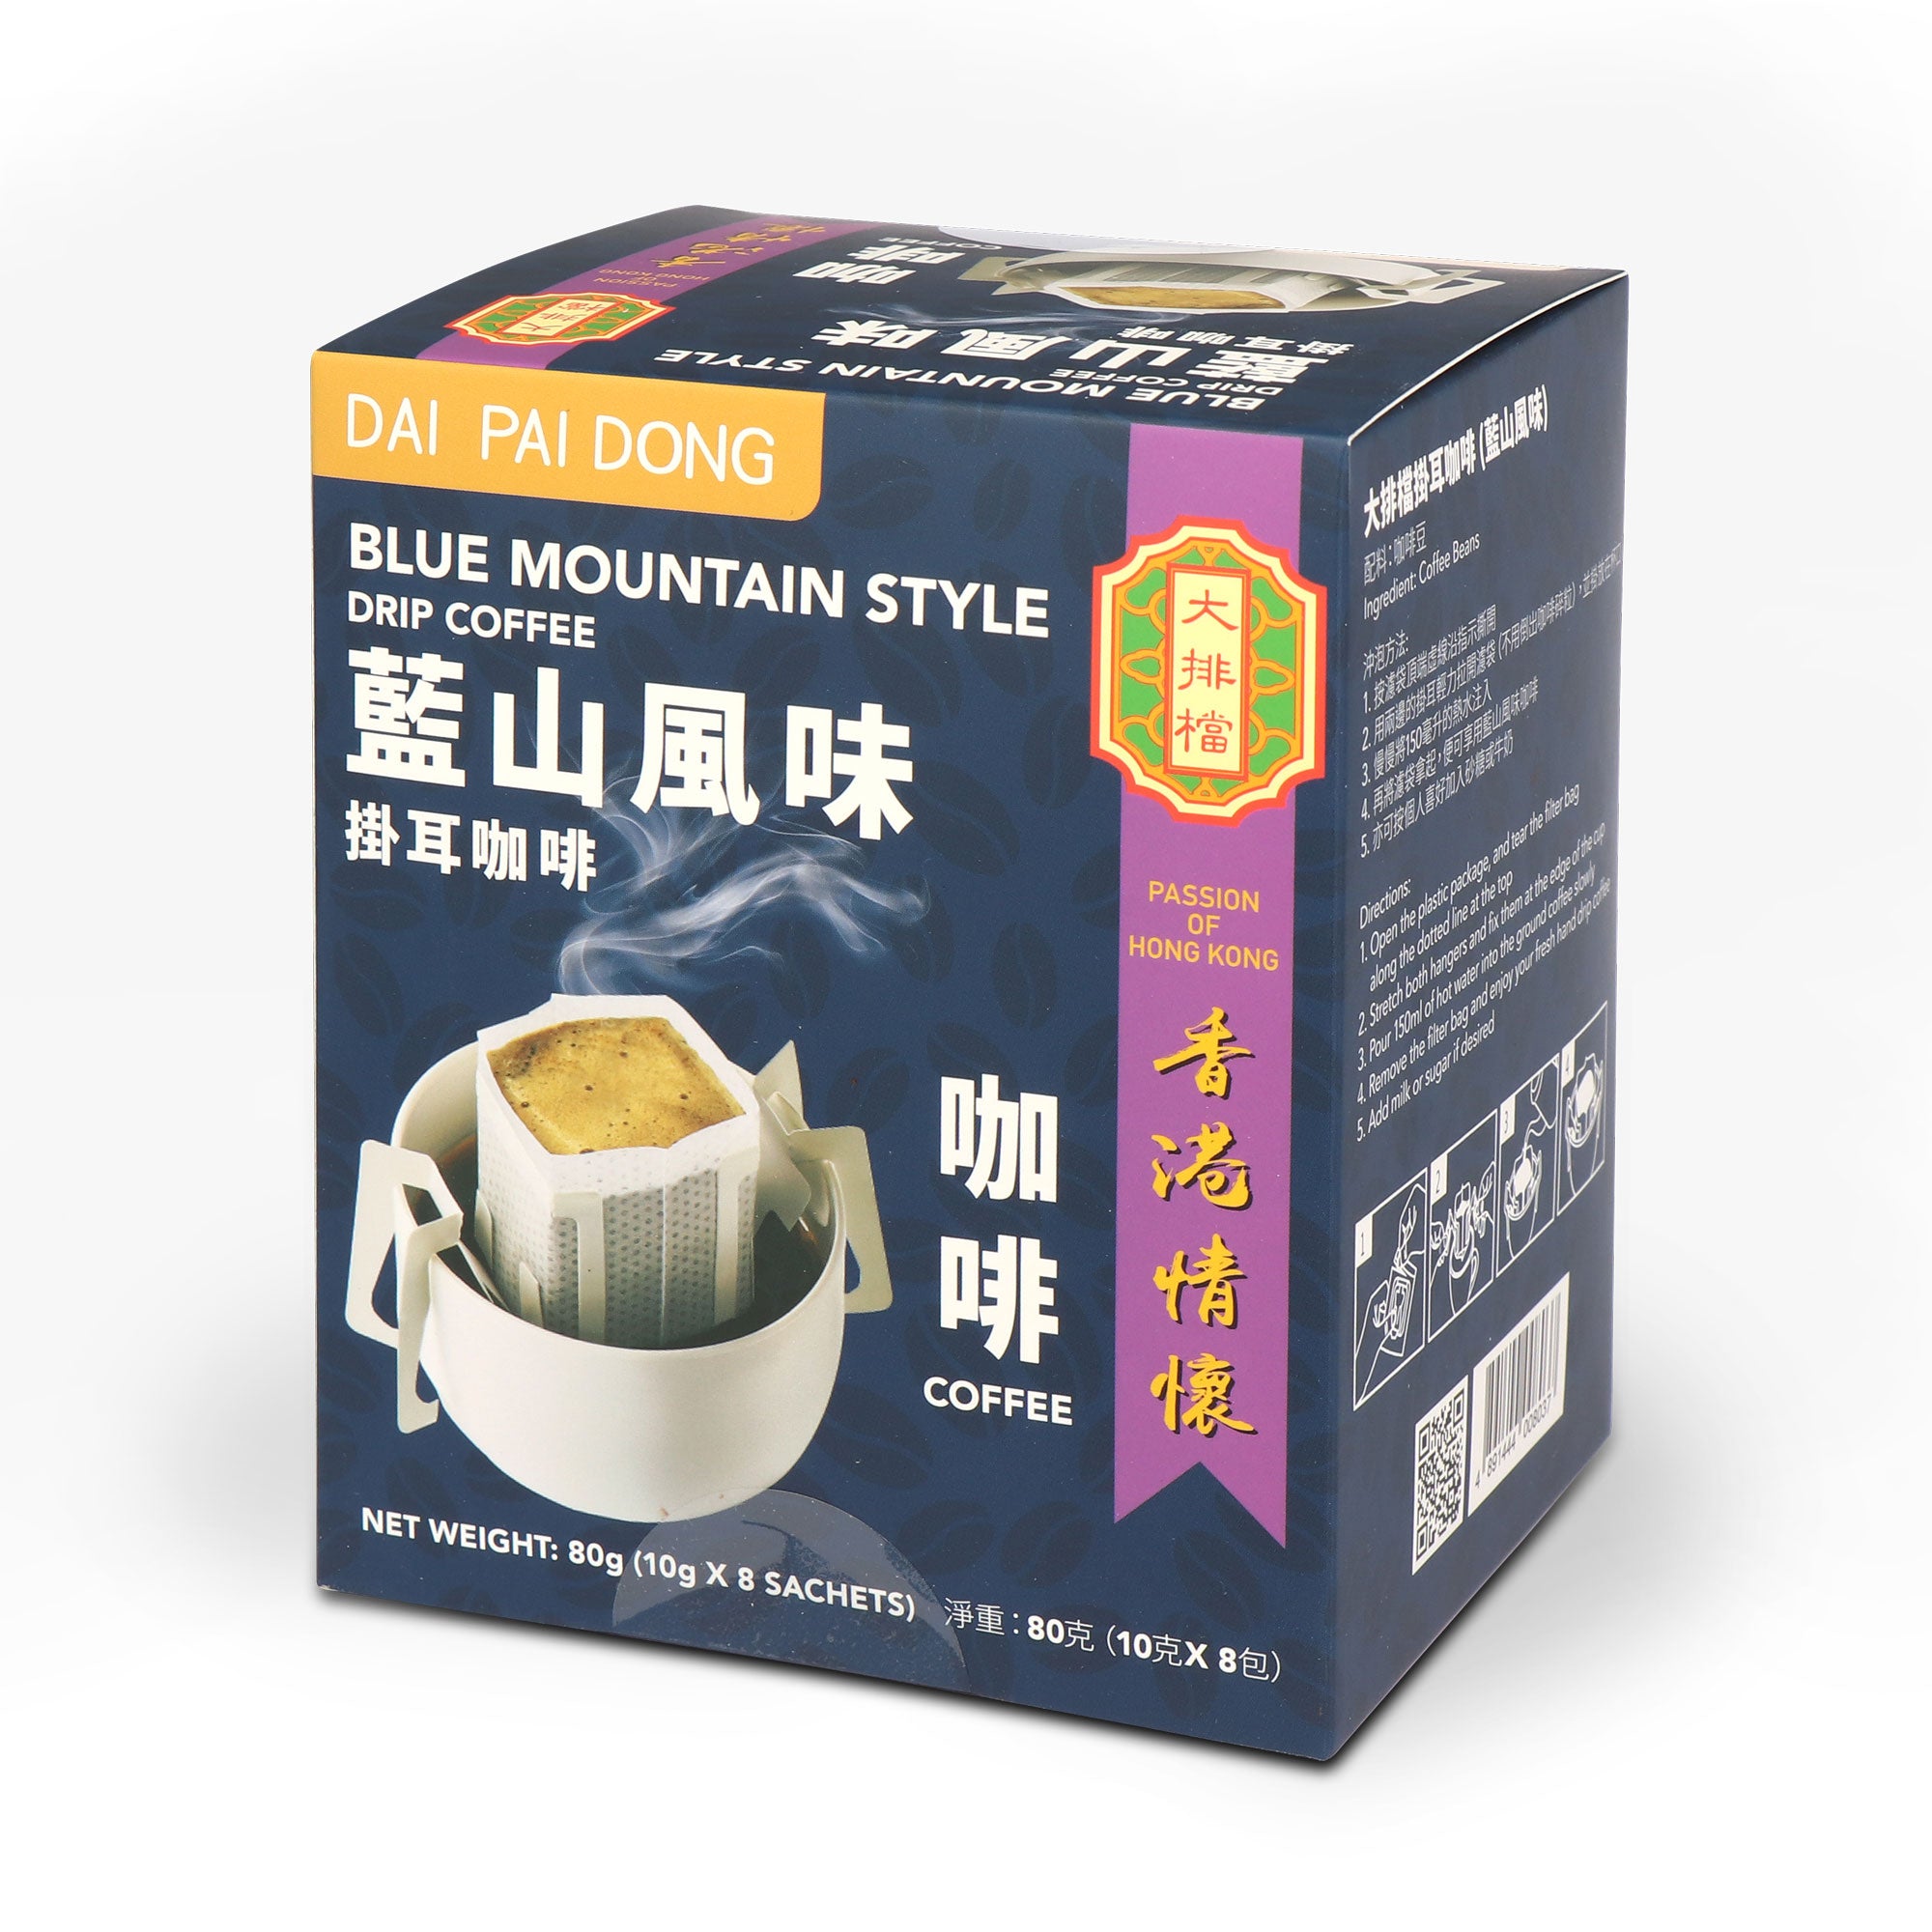 DPD Drip Coffee (Blue Mountain Style) 大排檔掛耳咖啡(藍山風味)